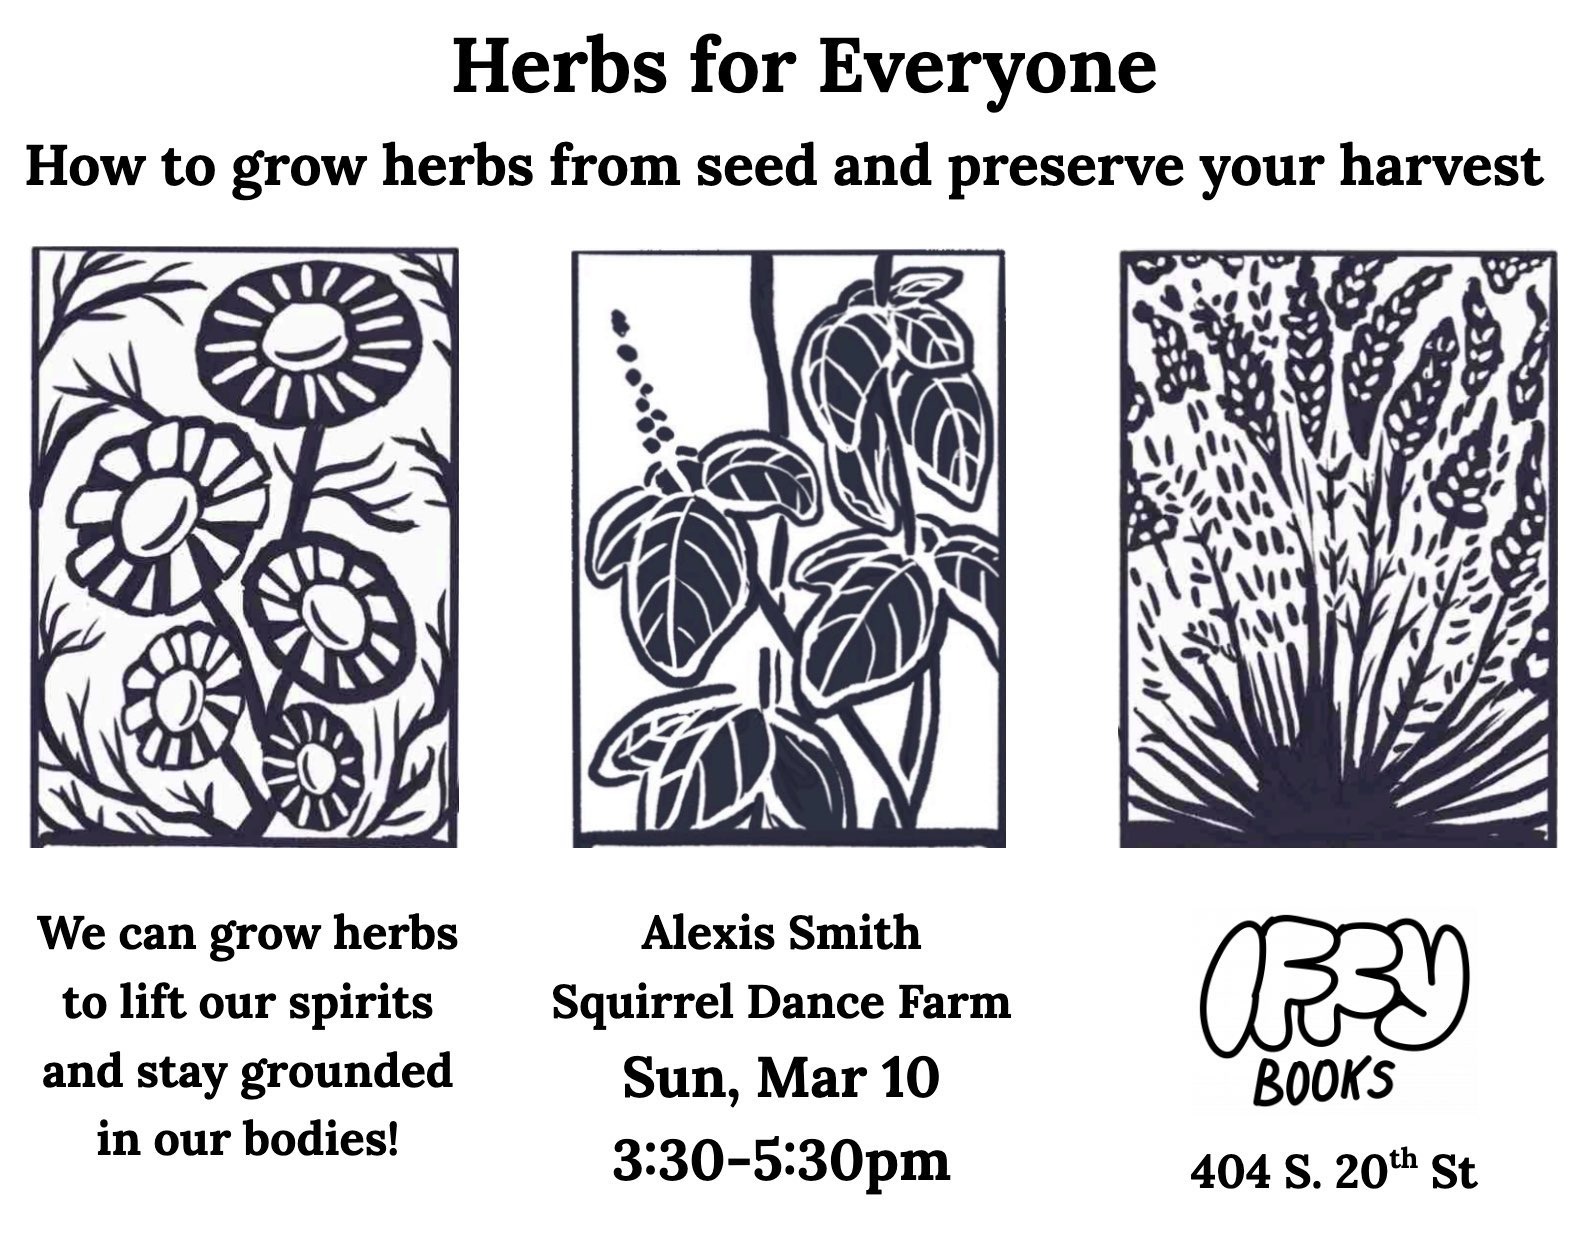 Flyer with woodcut images of three flowering plants along with the following text: Herbs for Everyone / How to grow herbs from seed and preserve your harvest / We can grow herbs to lift our spirits and stay grounded in our bodies! / Alexis Smith (Squirrel Dance Farm) / Sun, Mar 10 3:30-5:30 p.m. Iffy Books 404 S. 20th St.